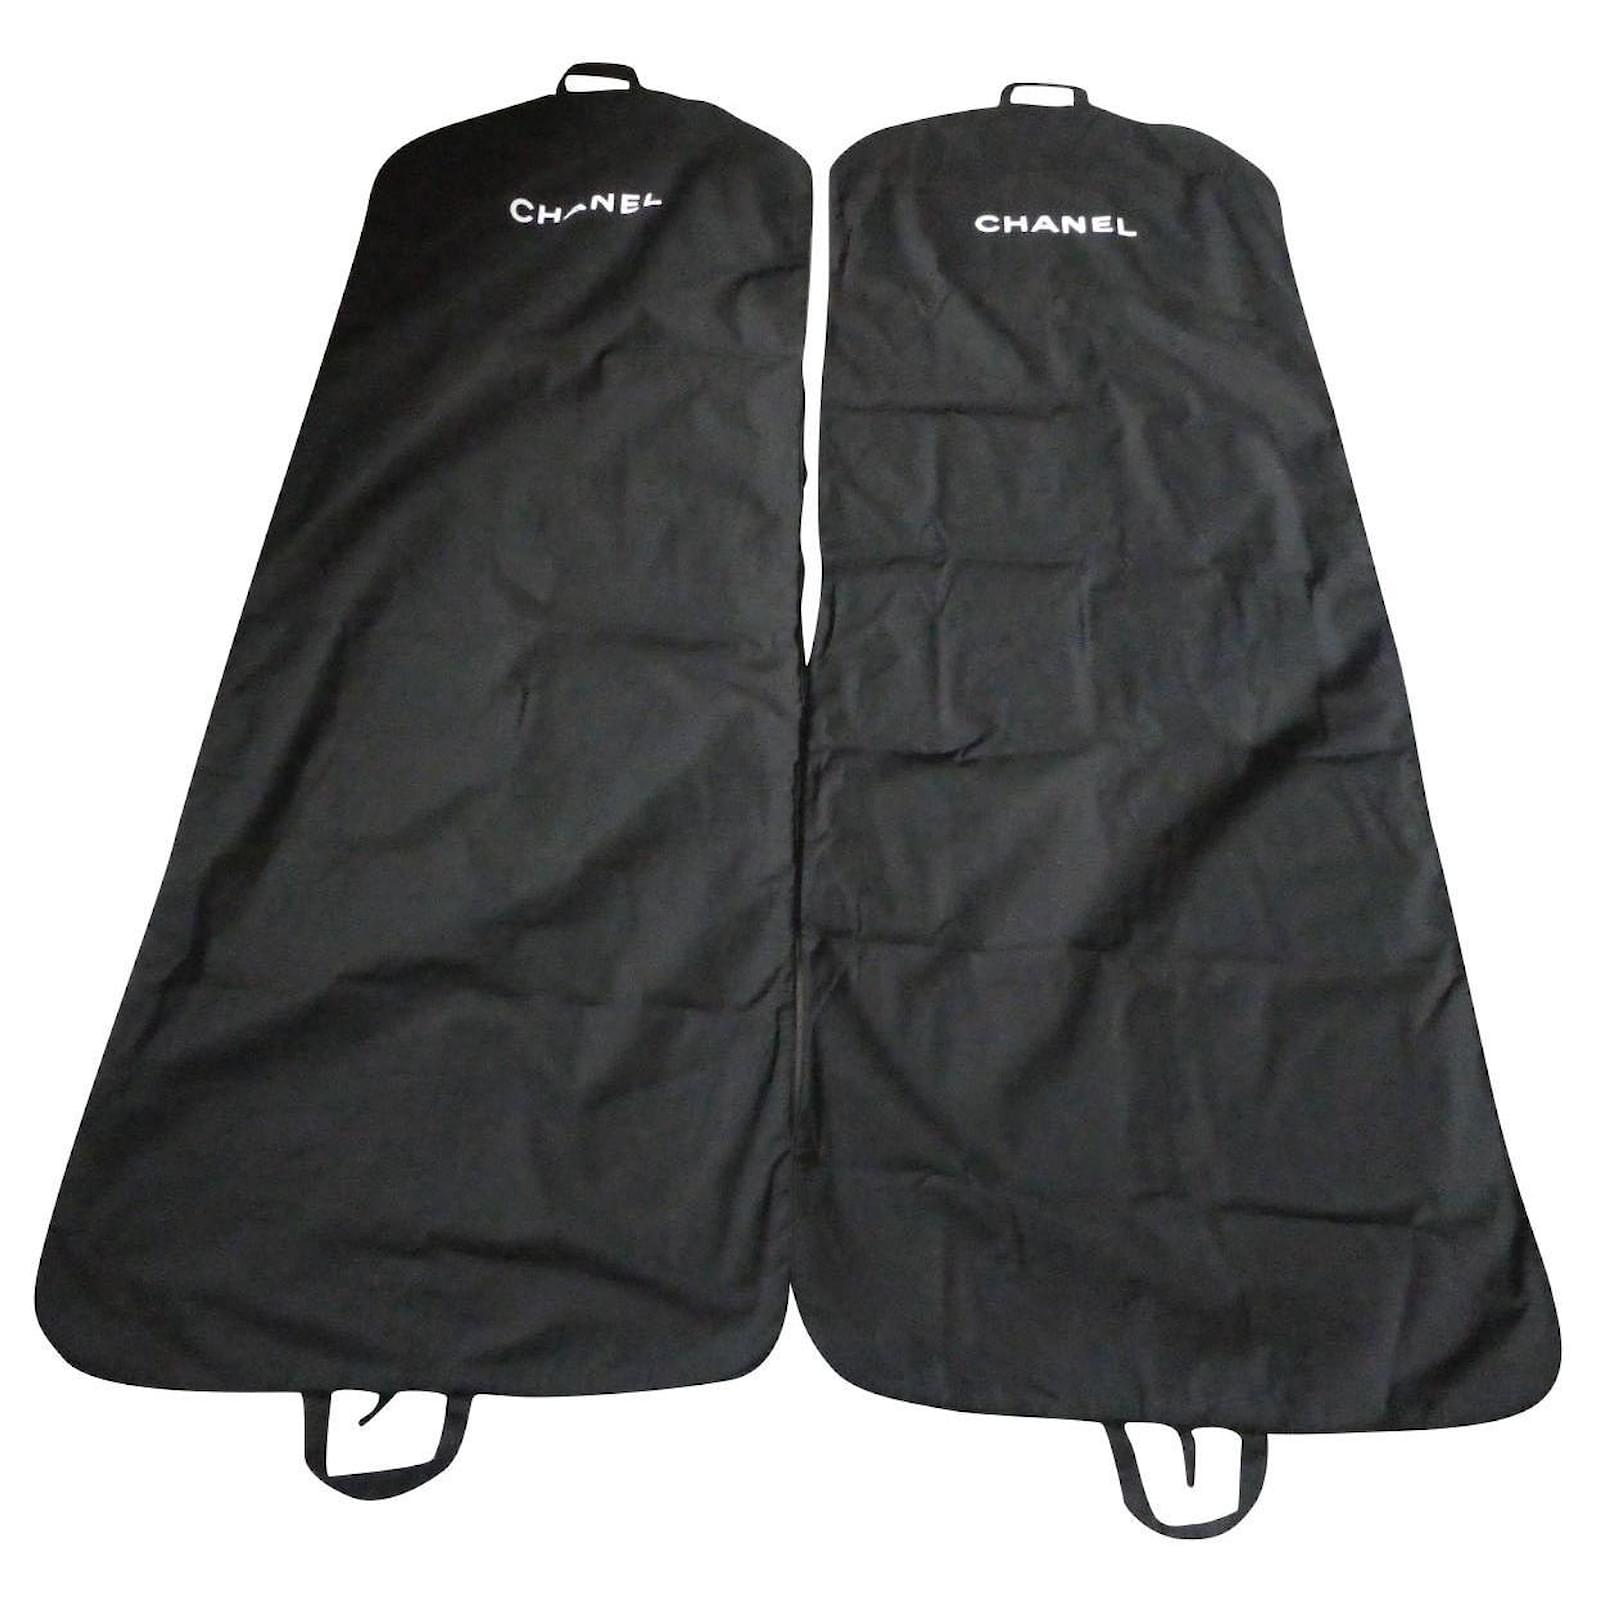 Lot of 2 new chanel garment bags never used 1M85 Black Acrylic ref